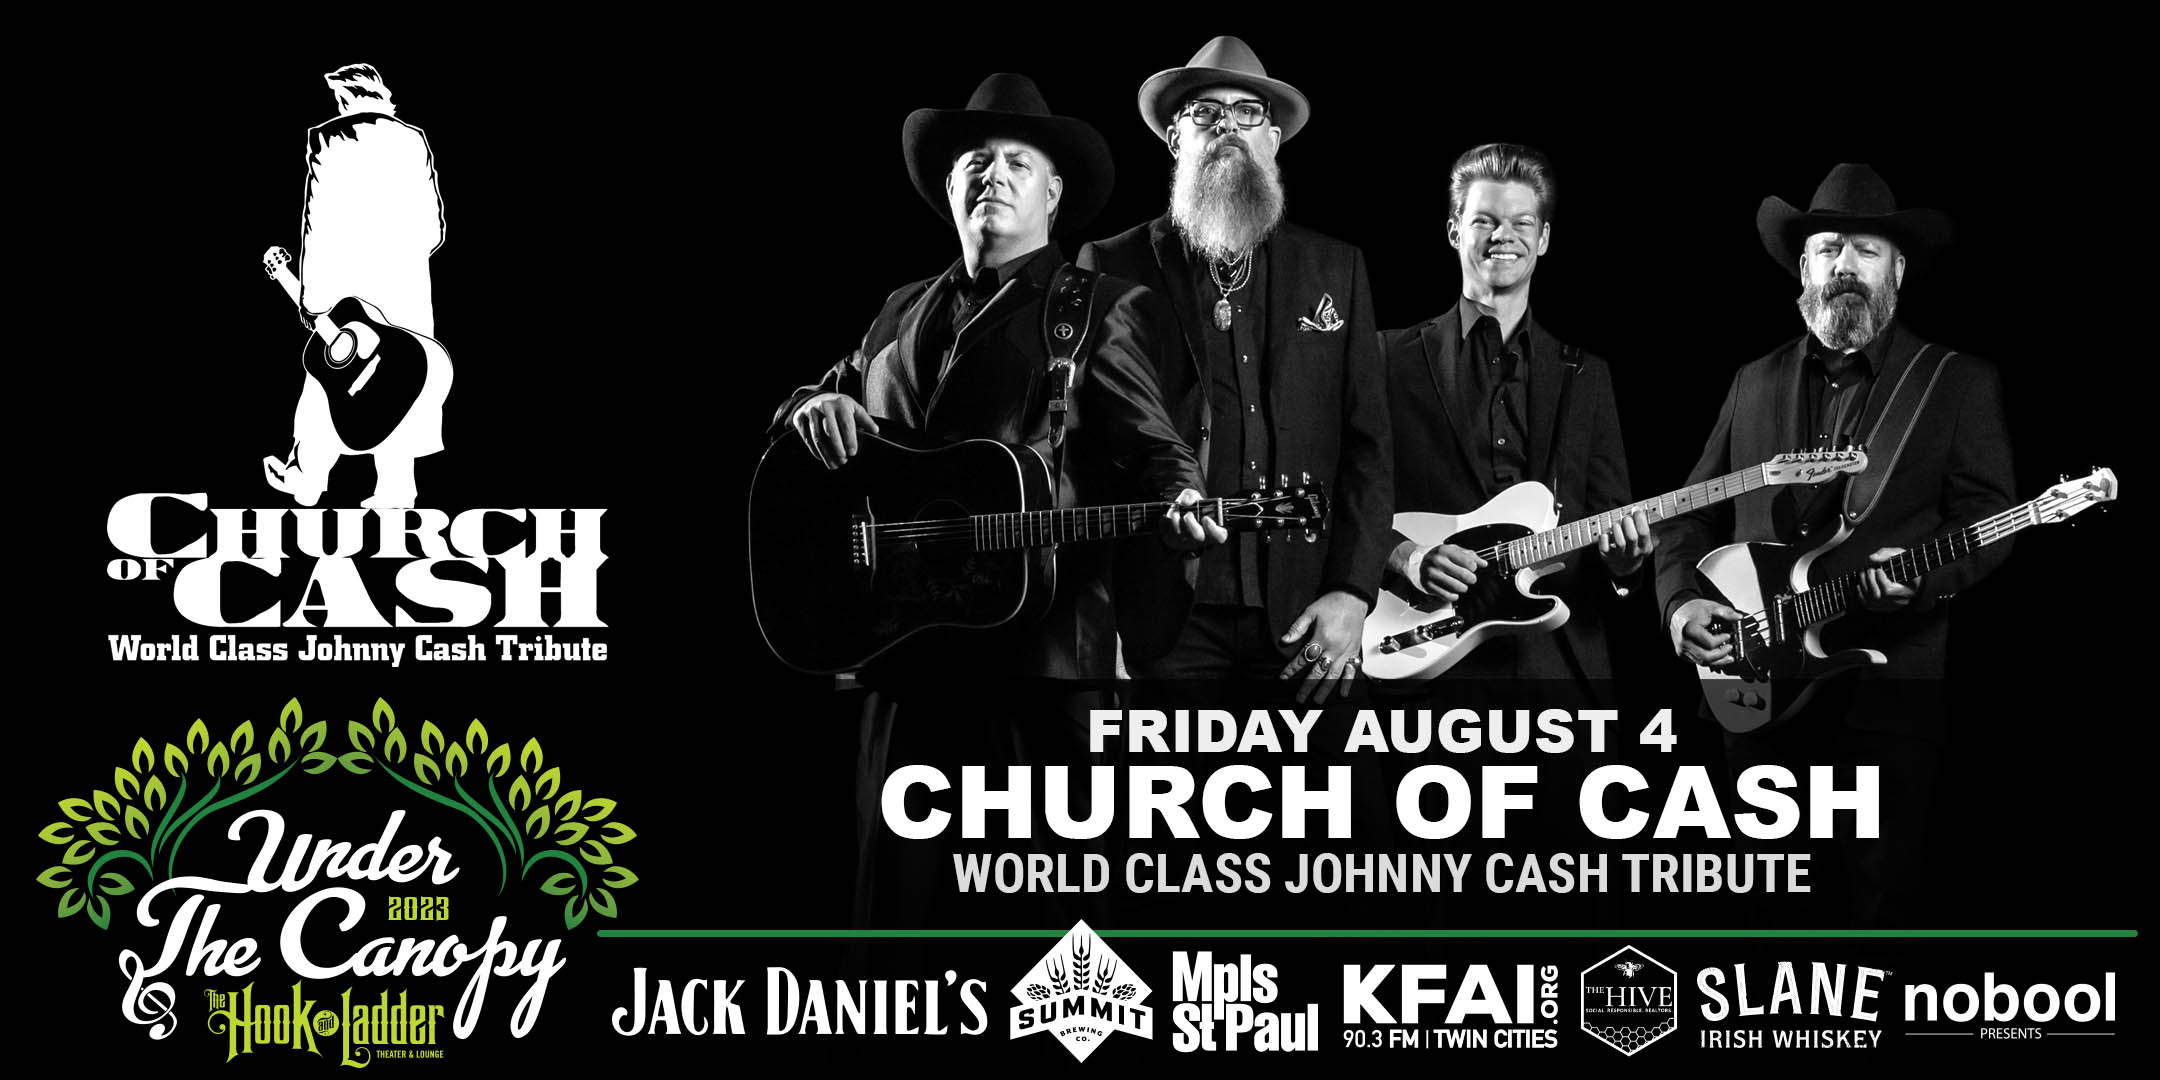 Church of Cash Friday, August 4, 2023 Under The Canopy at The Hook and Ladder Theater "An Urban Outdoor Summer Concert Series" Doors 6:00pm :: Music 7:00pm :: 21+ Reserved Seats: $30 GA: $20 ADV / $25 DOS